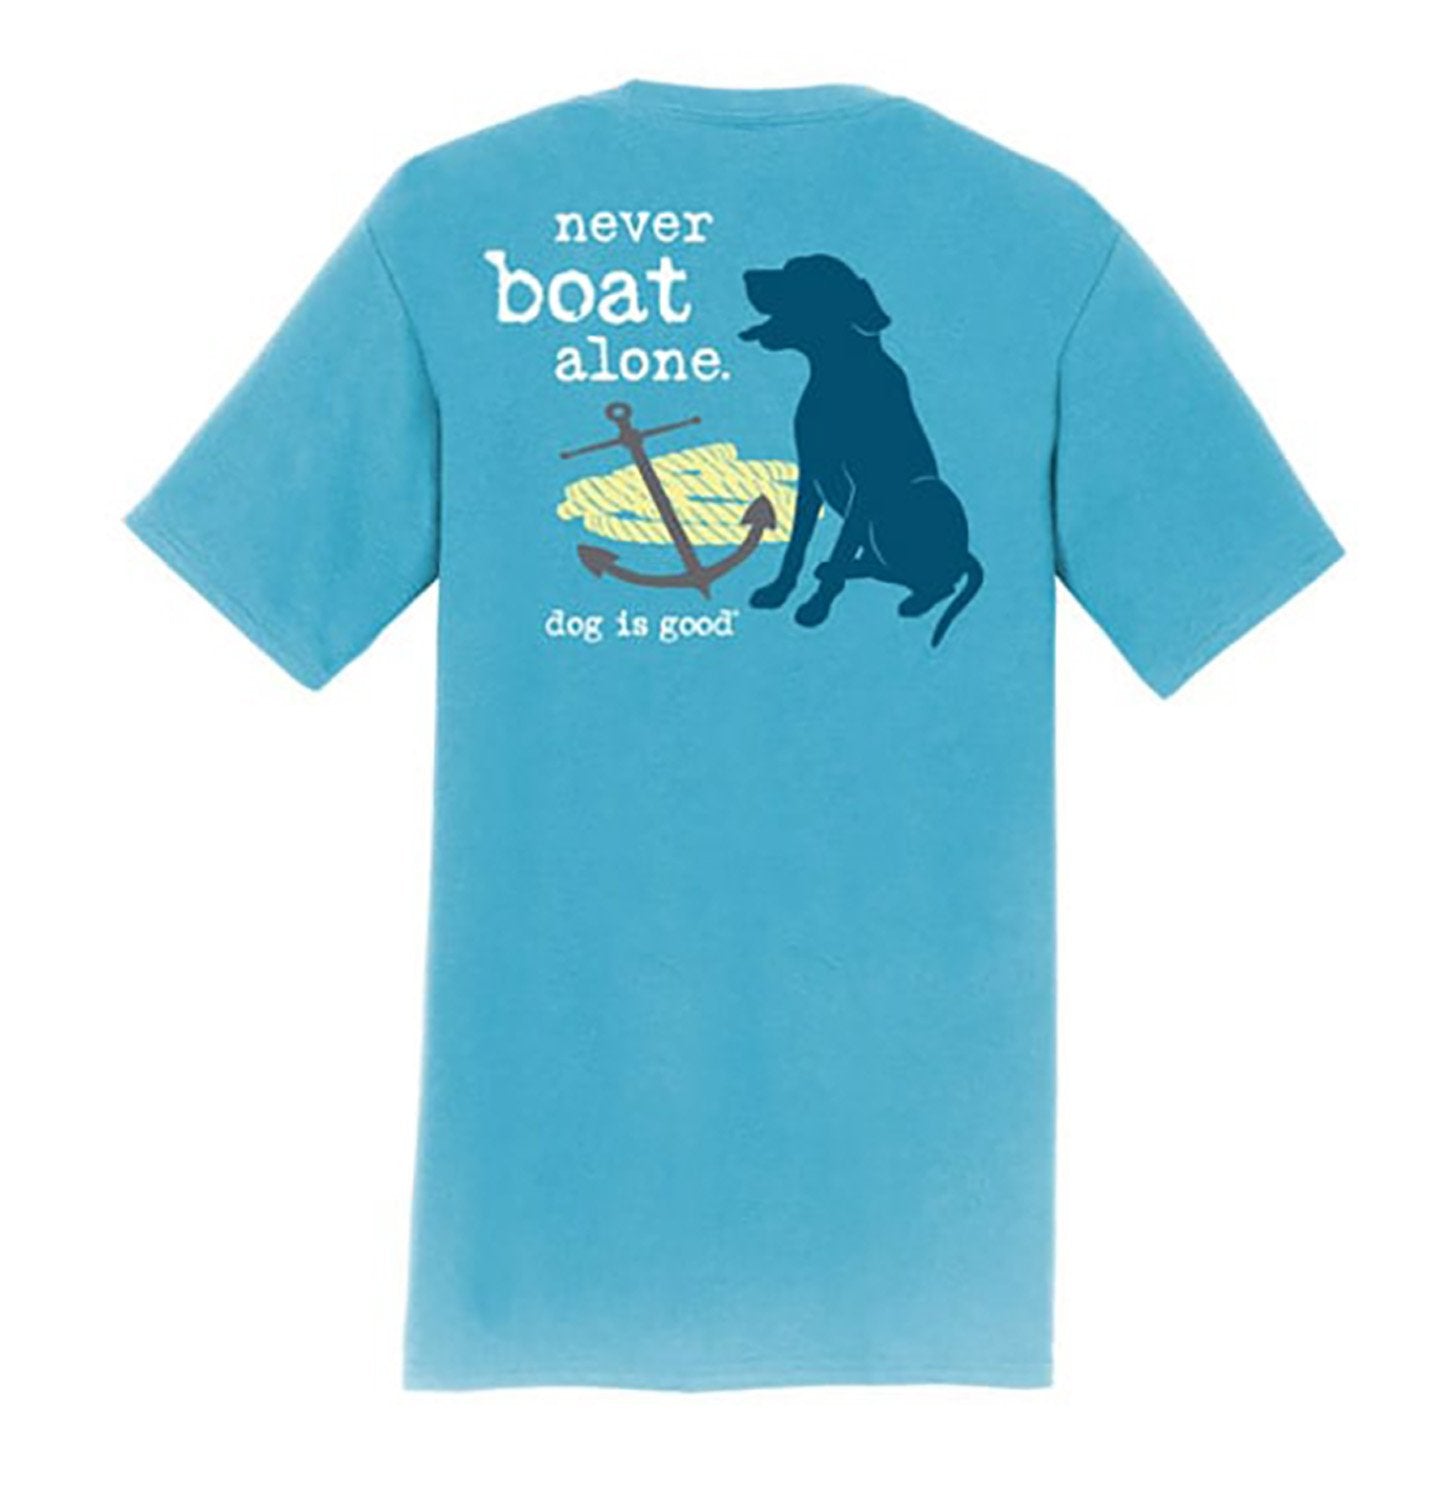 Never Boat Alone - Adult Unisex T-Shirt